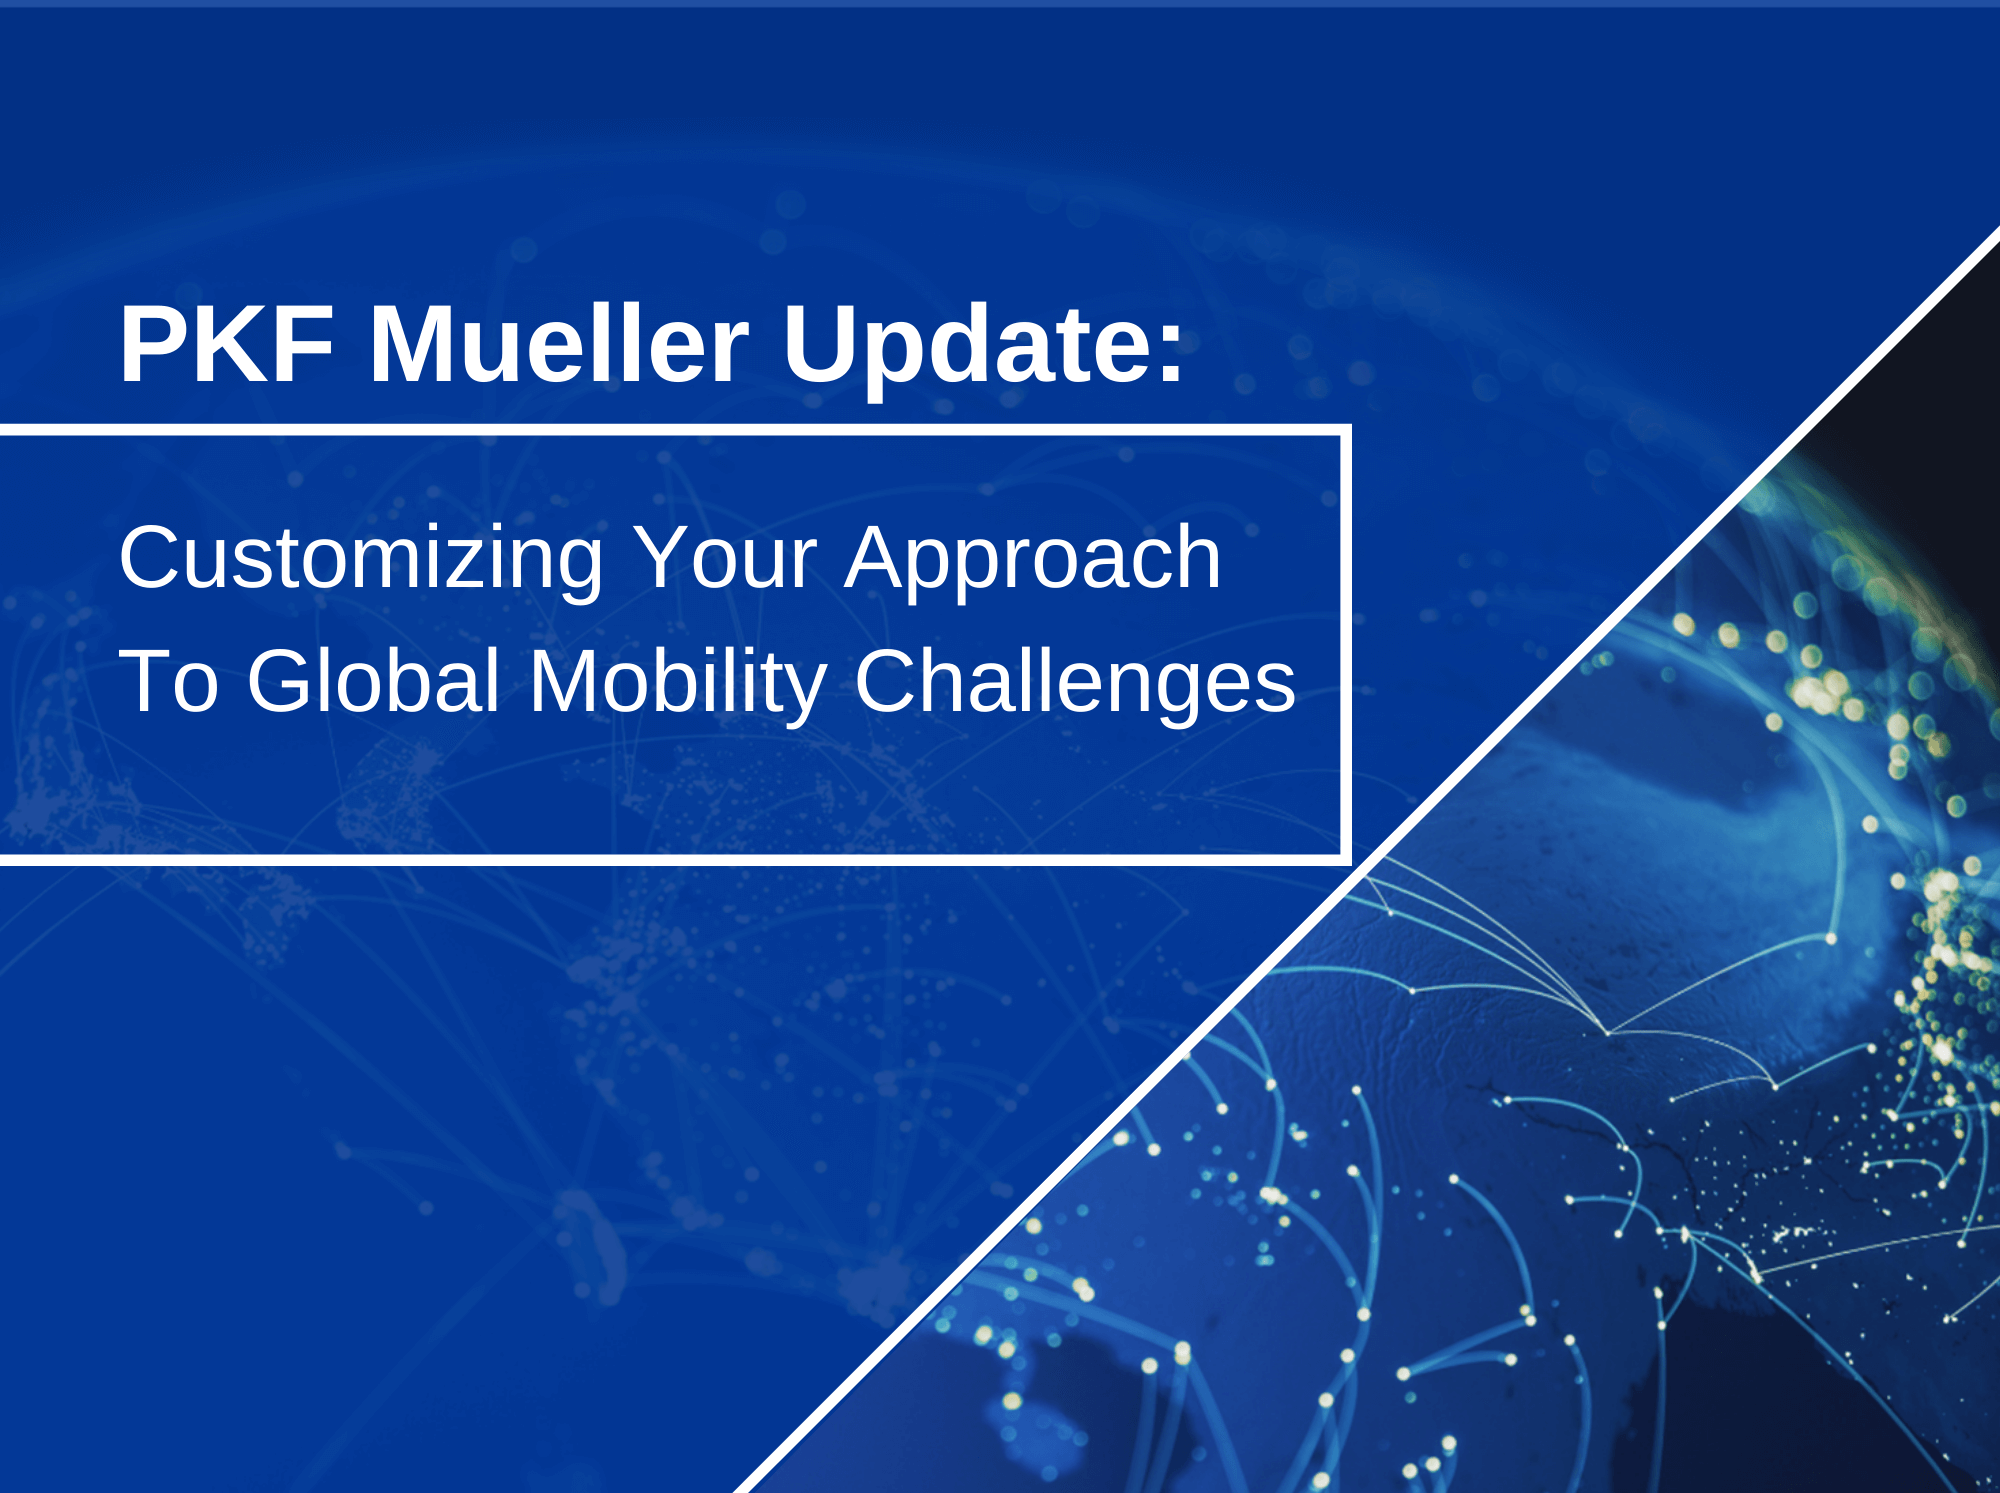 Customizing Your Approach To Global Mobility Challenges